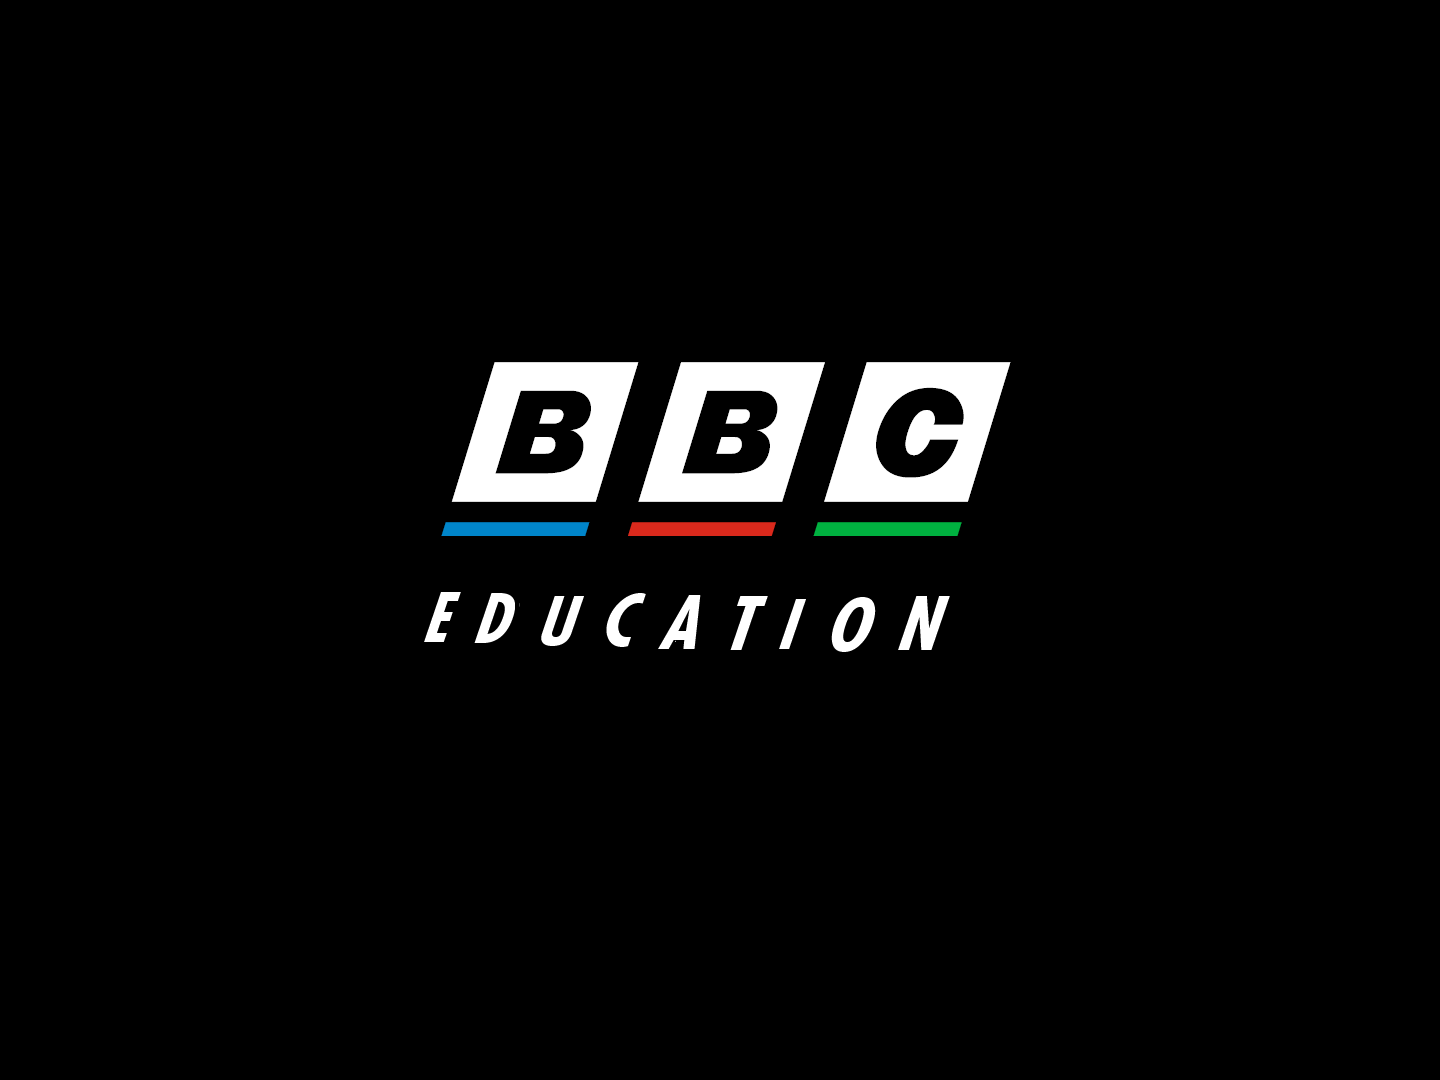 1990s Logo - BBC Education logo from the 1990s: An attempt at recreating the BBC